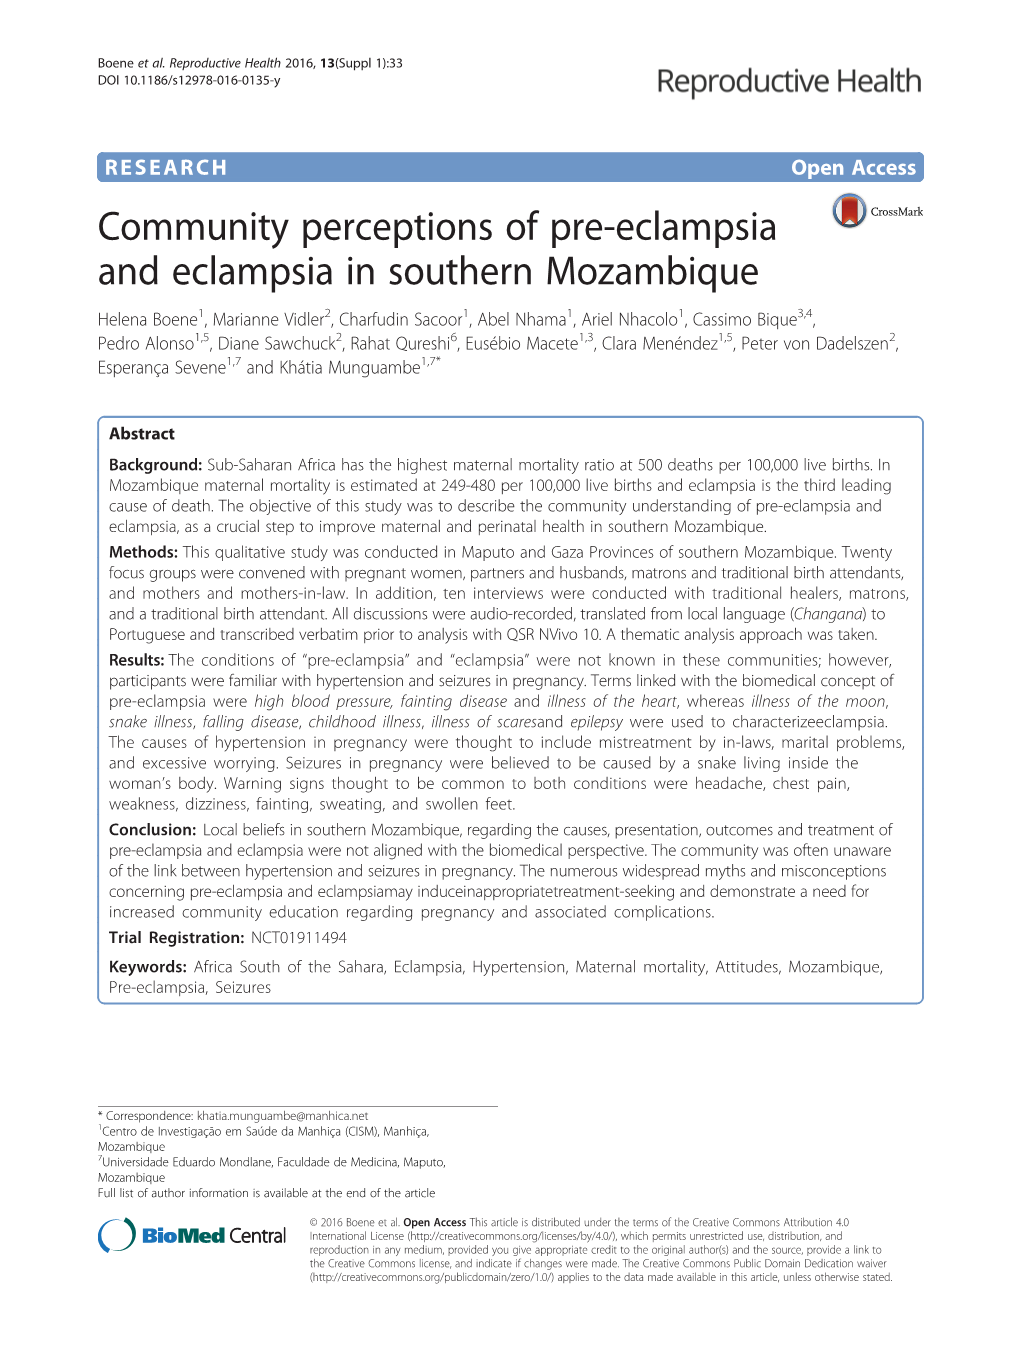 Community Perceptions of Pre-Eclampsia and Eclampsia in Southern Mozambique